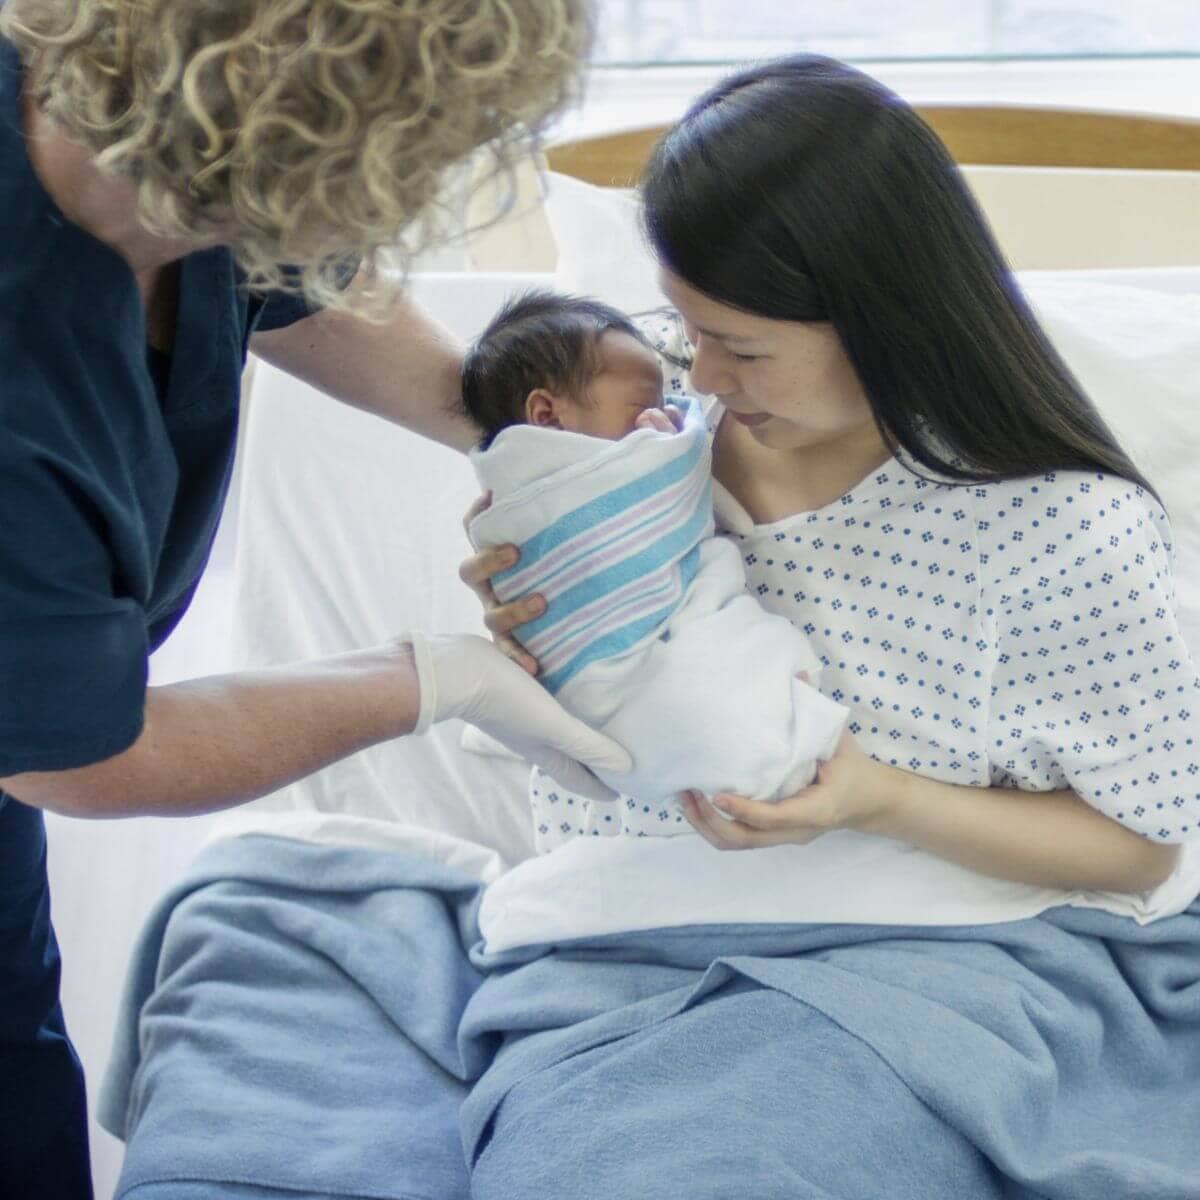 An Asian American woman with long black hair is sitting in a hospital bed. A nurse with blonde curly hair, wearing white gloves and dark blue scrubs is handing a newborn baby to the woman.